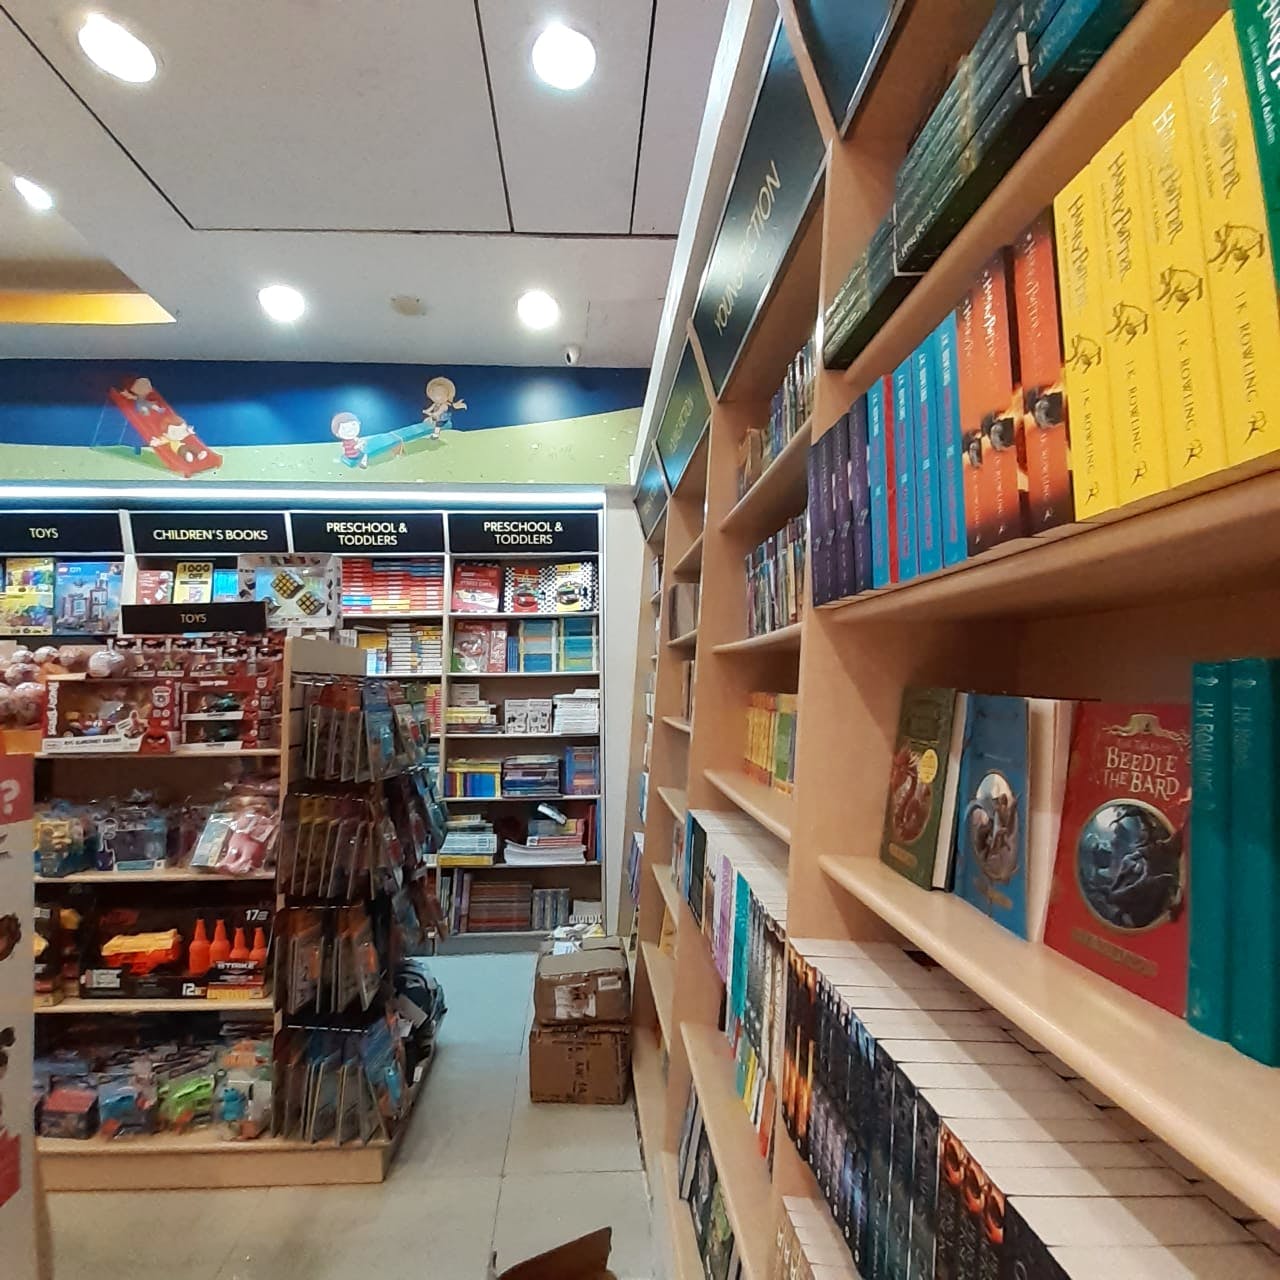 Visit These Shops For Books, Shoes & More